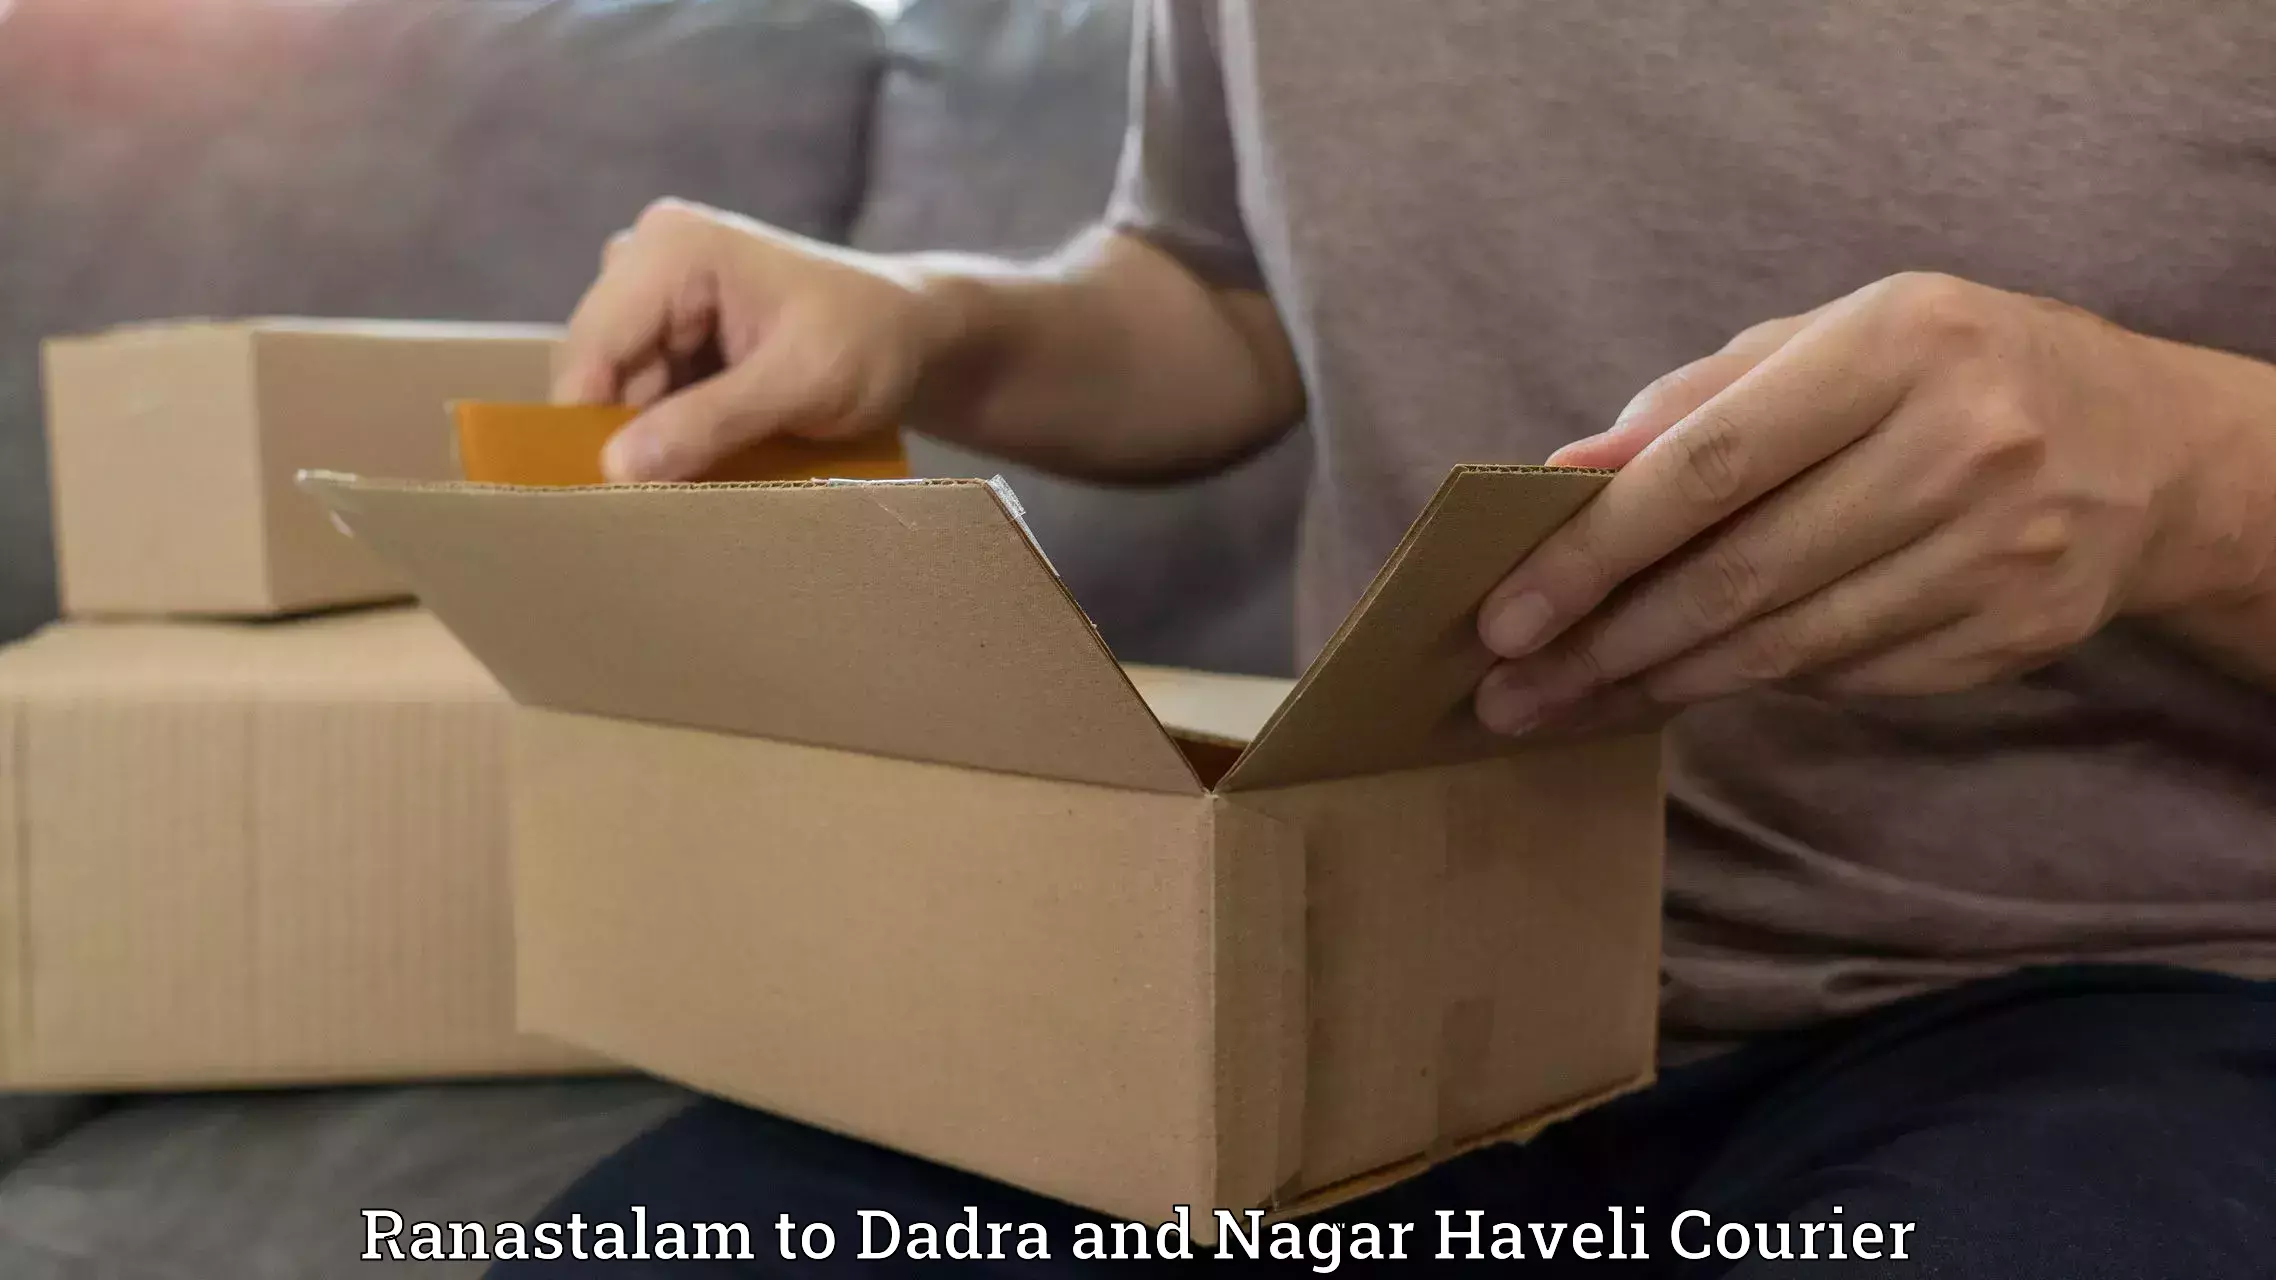 State-of-the-art courier technology Ranastalam to Dadra and Nagar Haveli